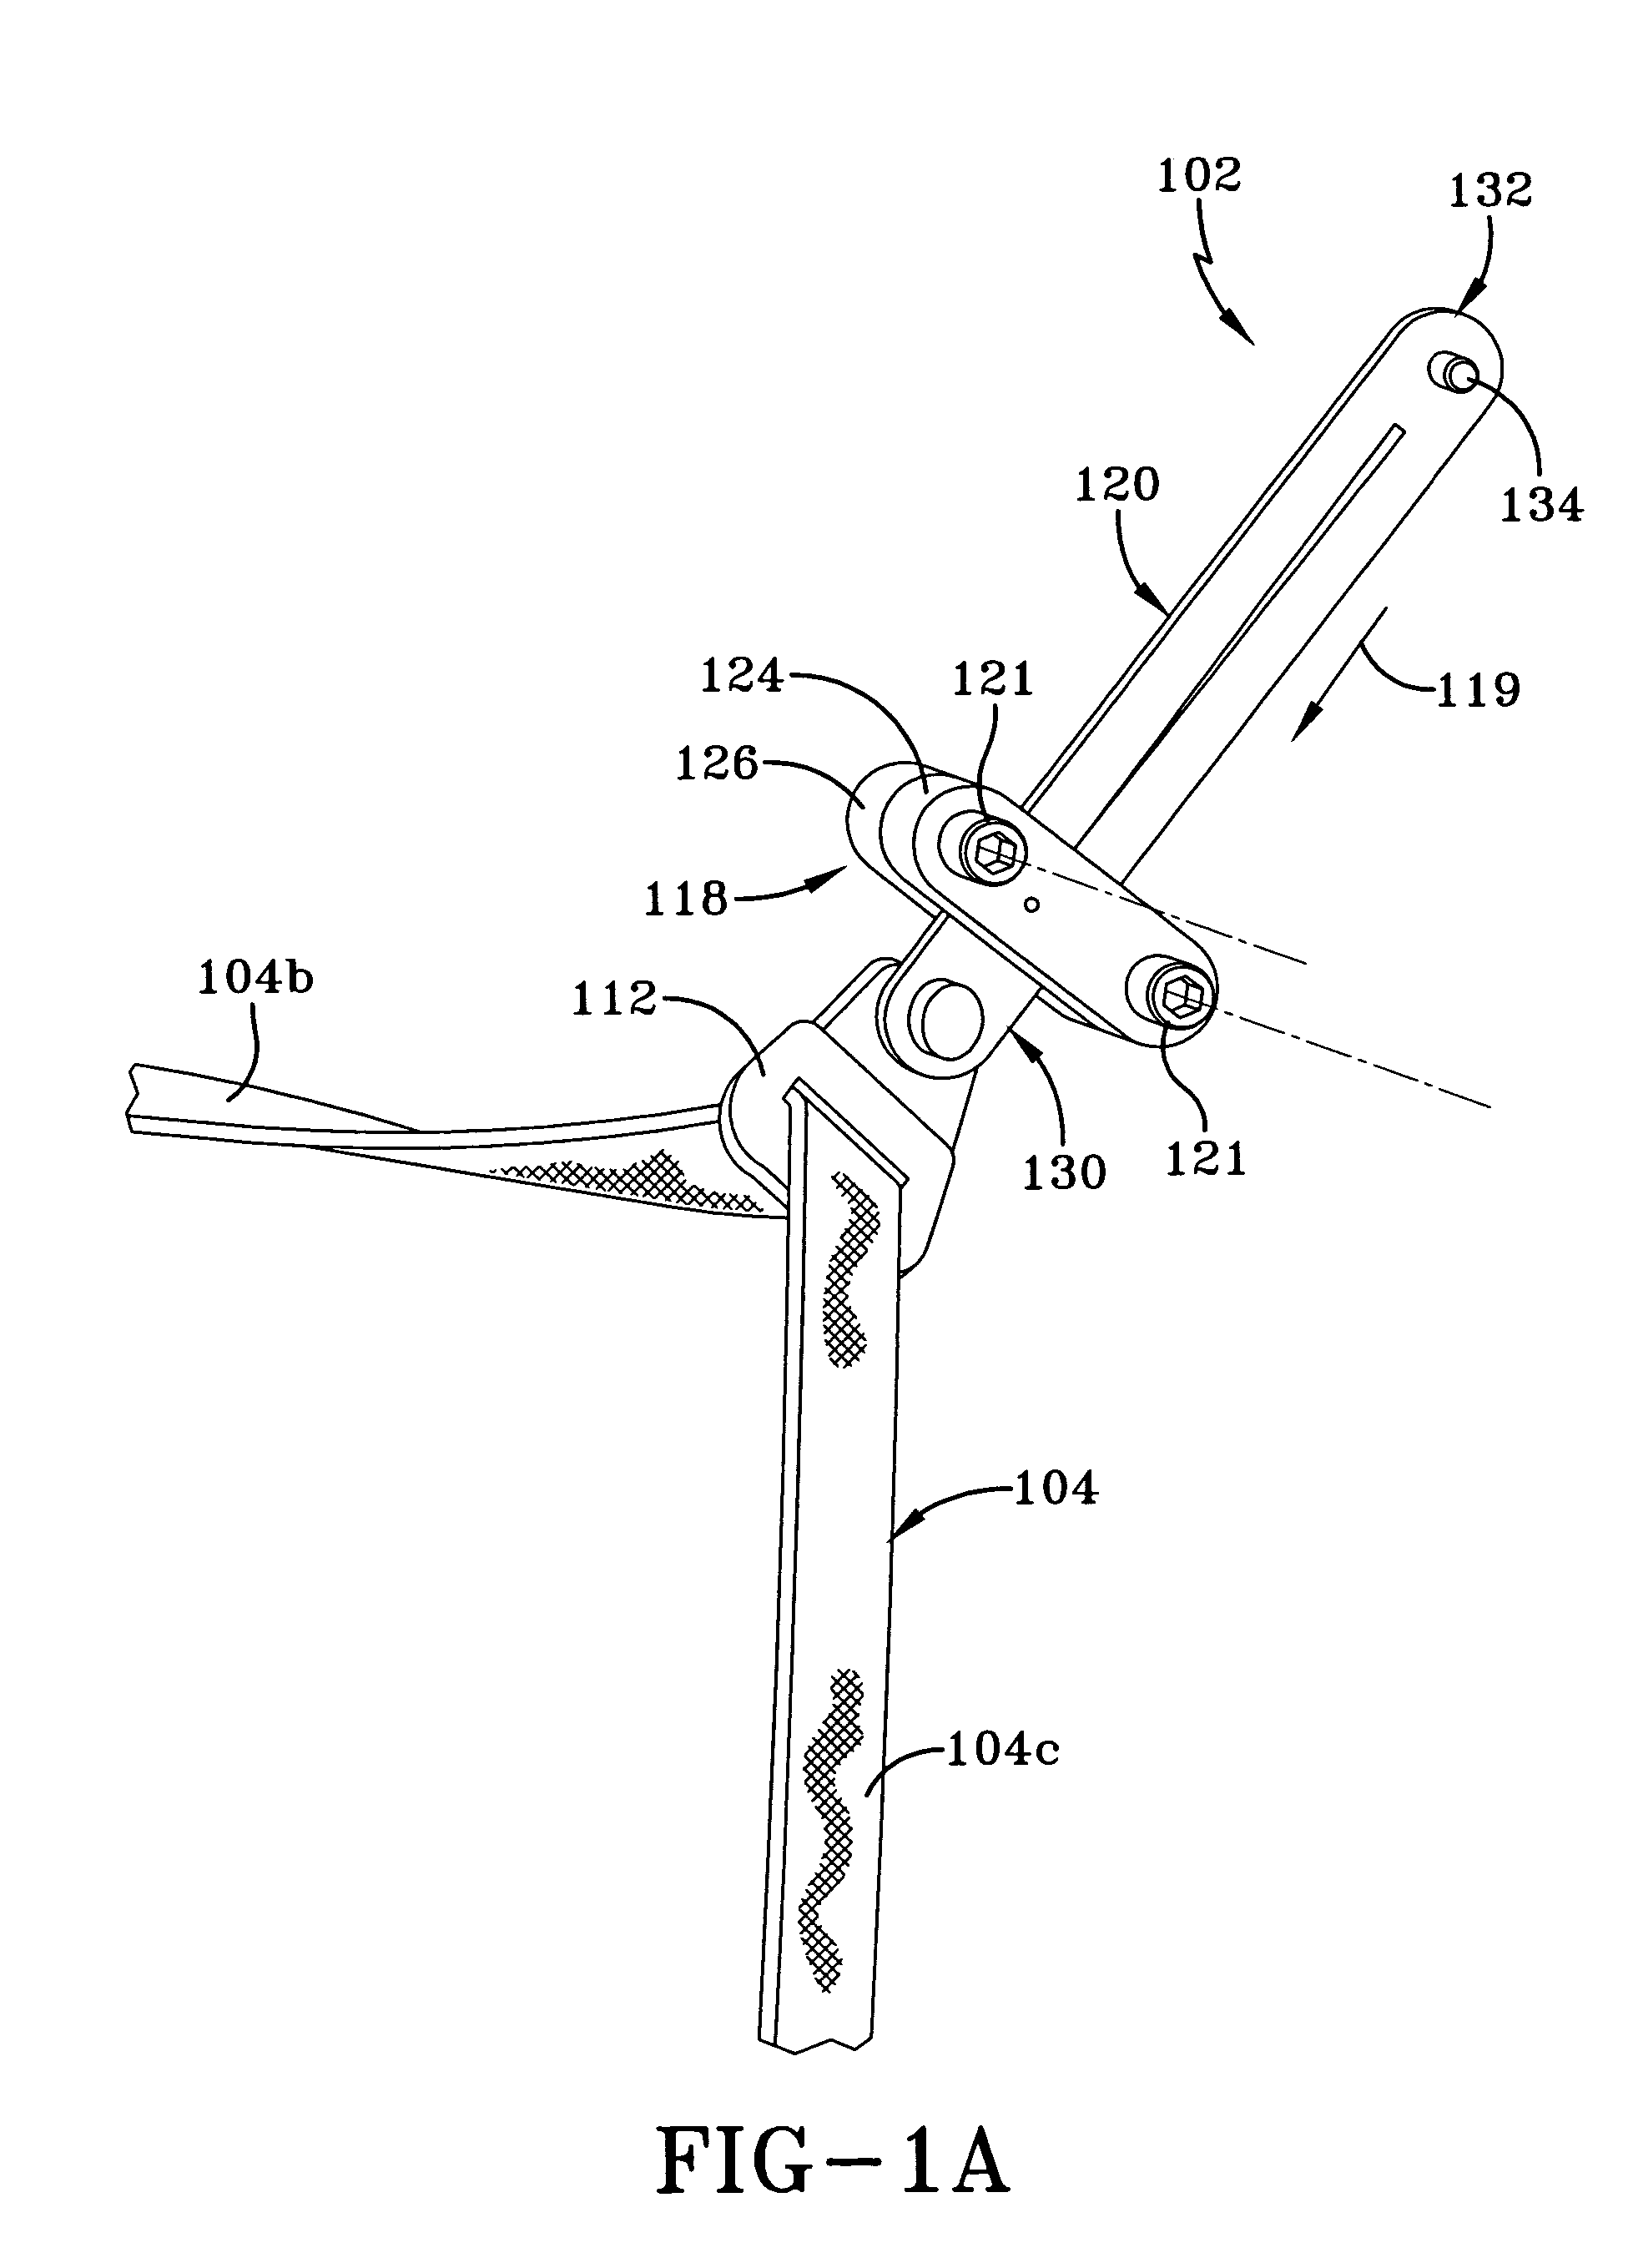 Load limiting structure for vehicle occupant restraint system